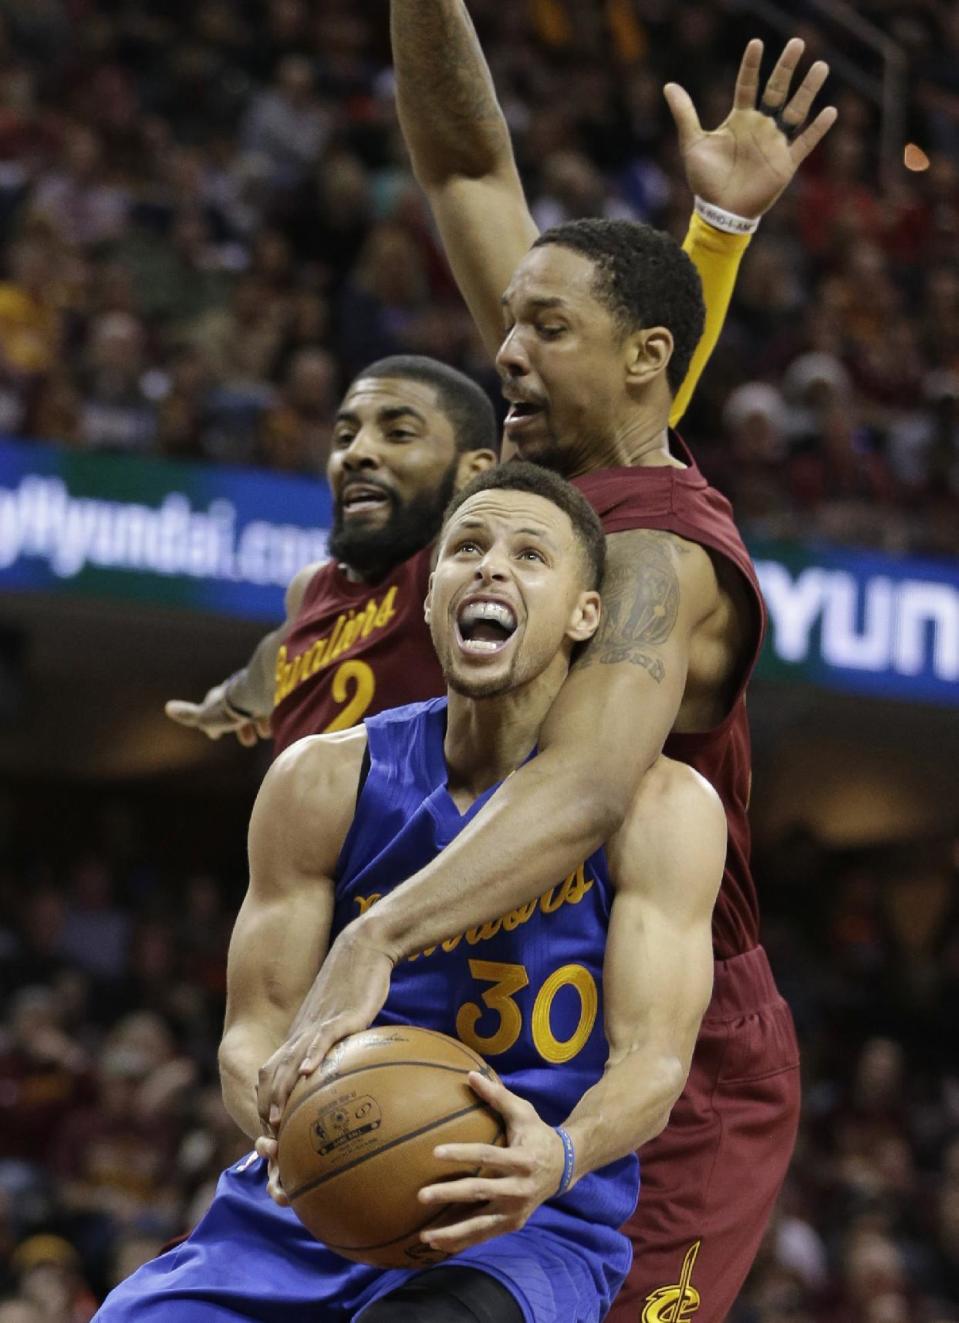 From foreground, Golden State Warriors' Stephen Curry is fouled by Cleveland Cavaliers' Channing Frye as Kyrie Irving defends in the second half of an NBA basketball game, Sunday, Dec. 25, 2016, in Cleveland. The Cavaliers won 109-108. (AP Photo/Tony Dejak)